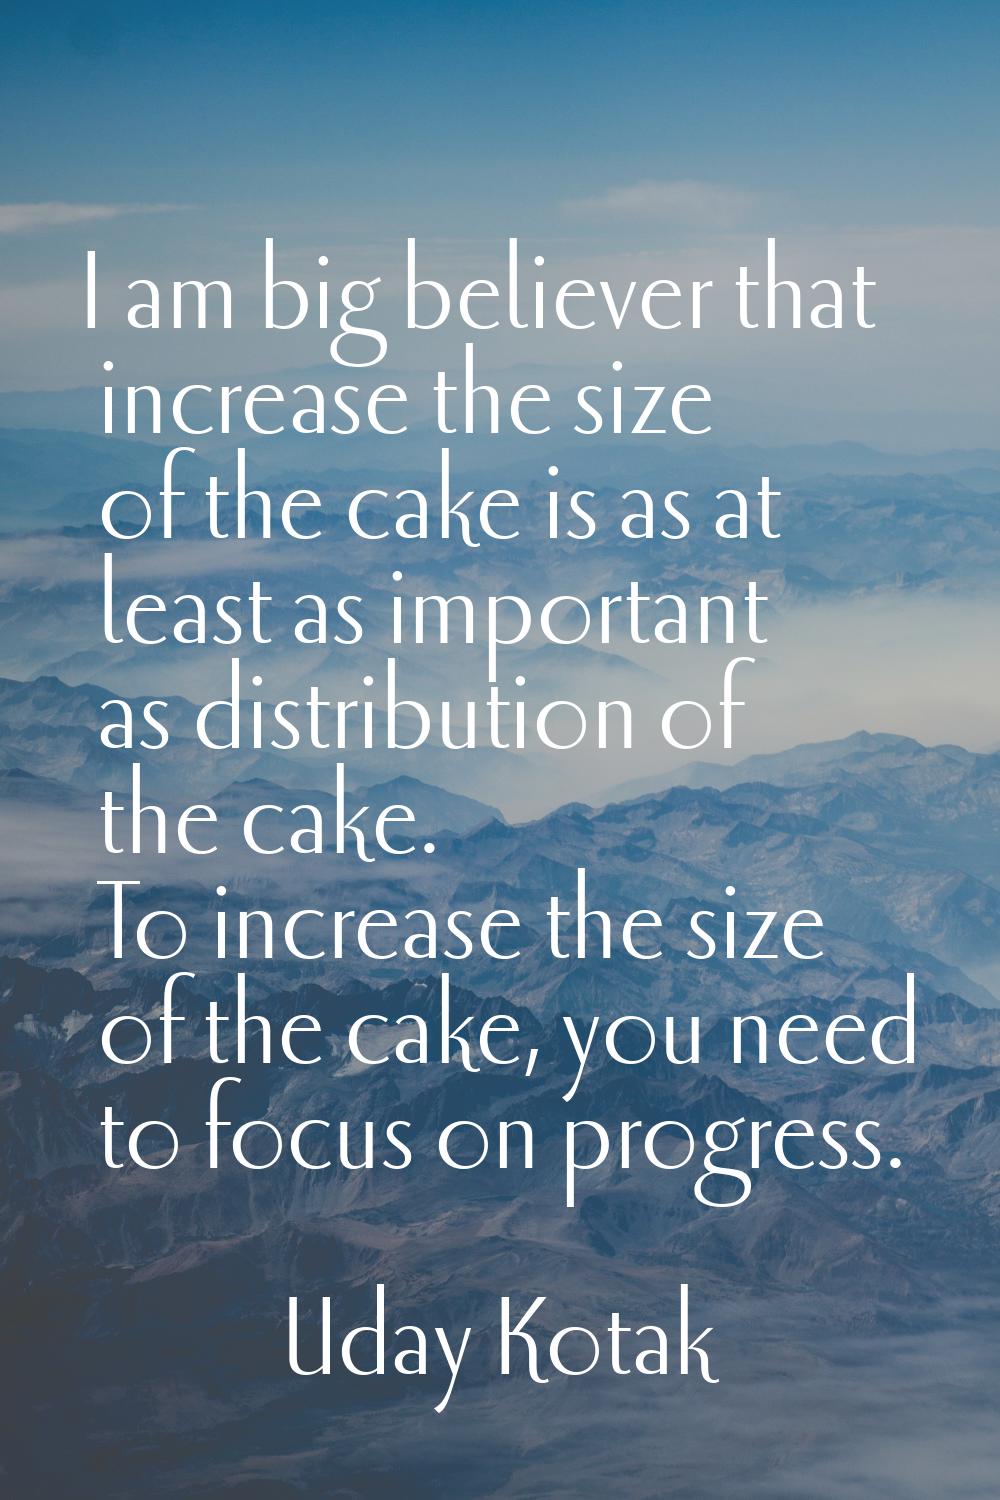 I am big believer that increase the size of the cake is as at least as important as distribution of